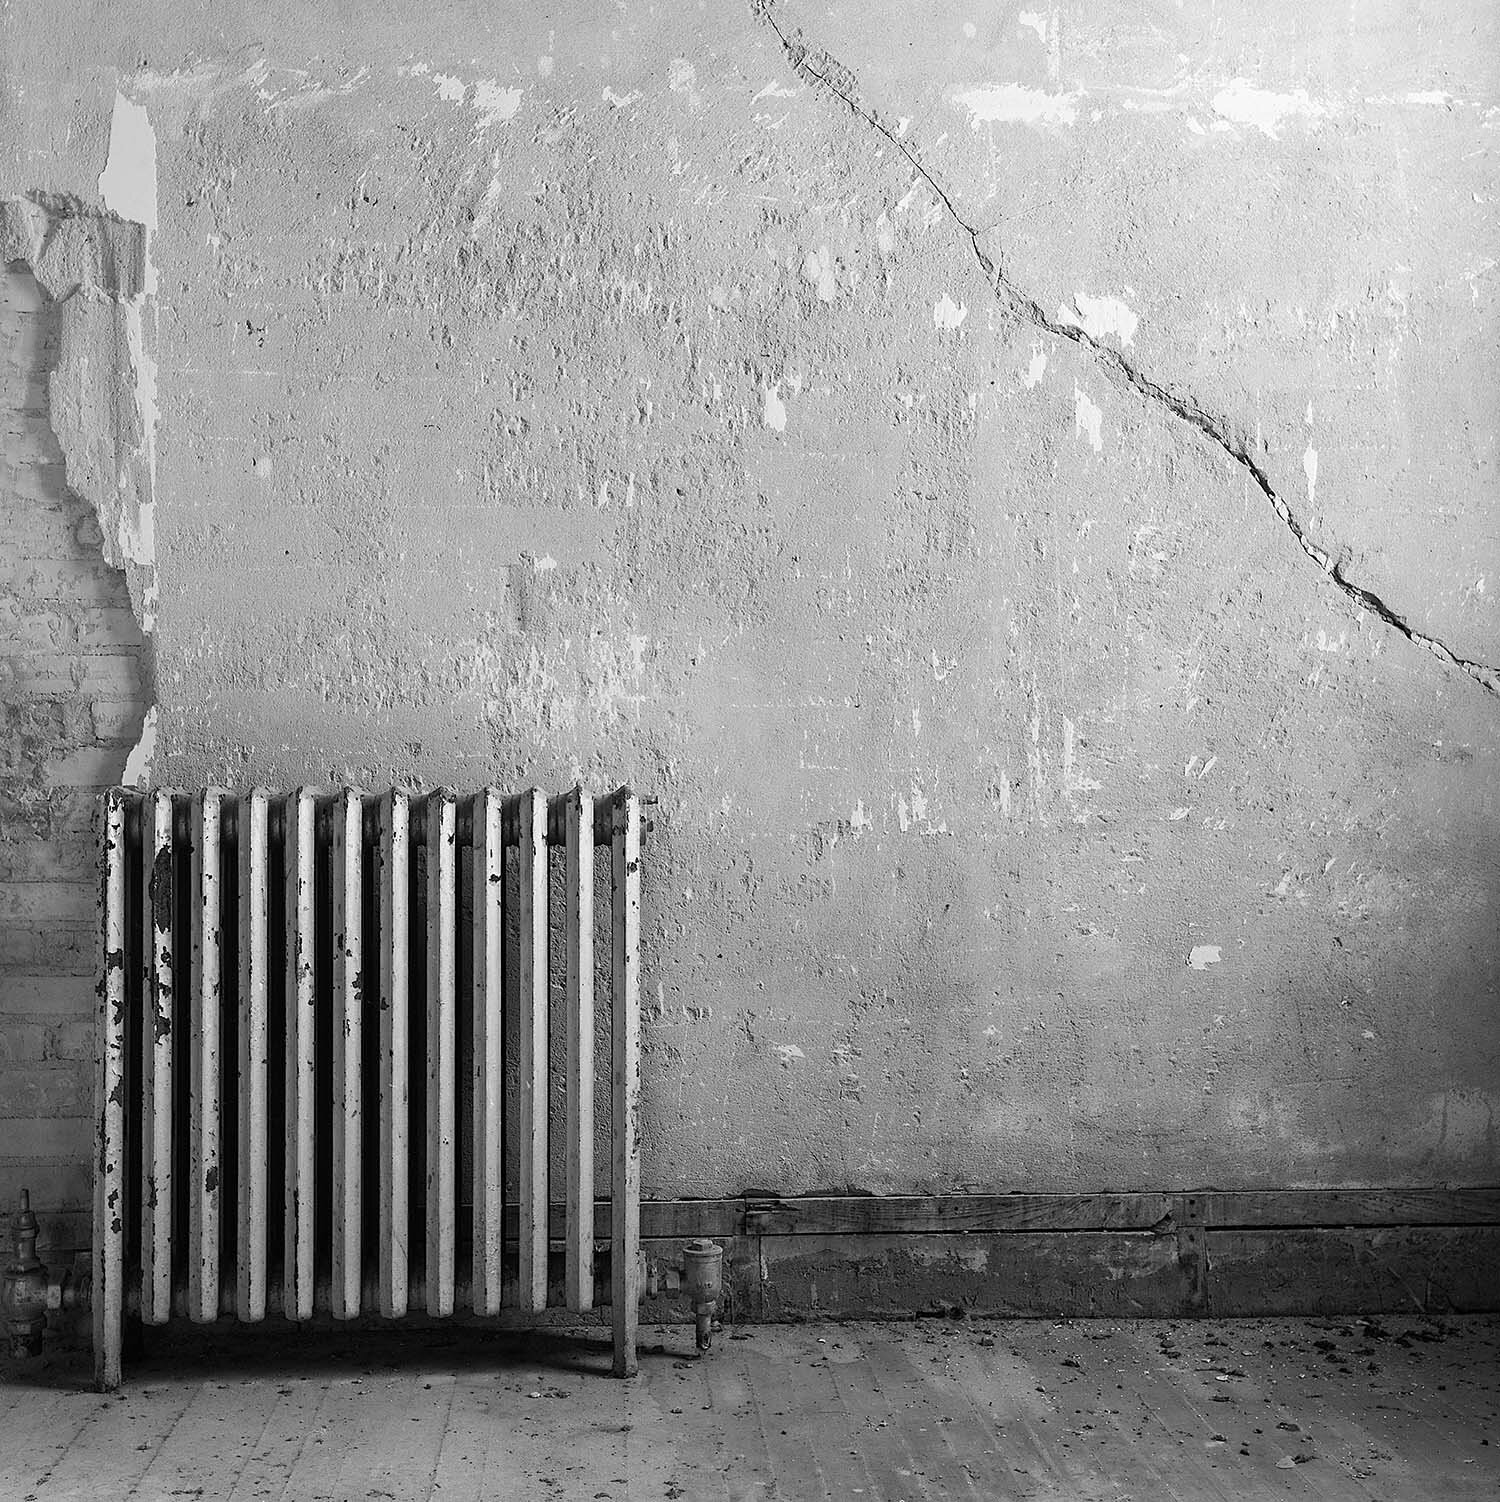 Radiator and Cracked Wall